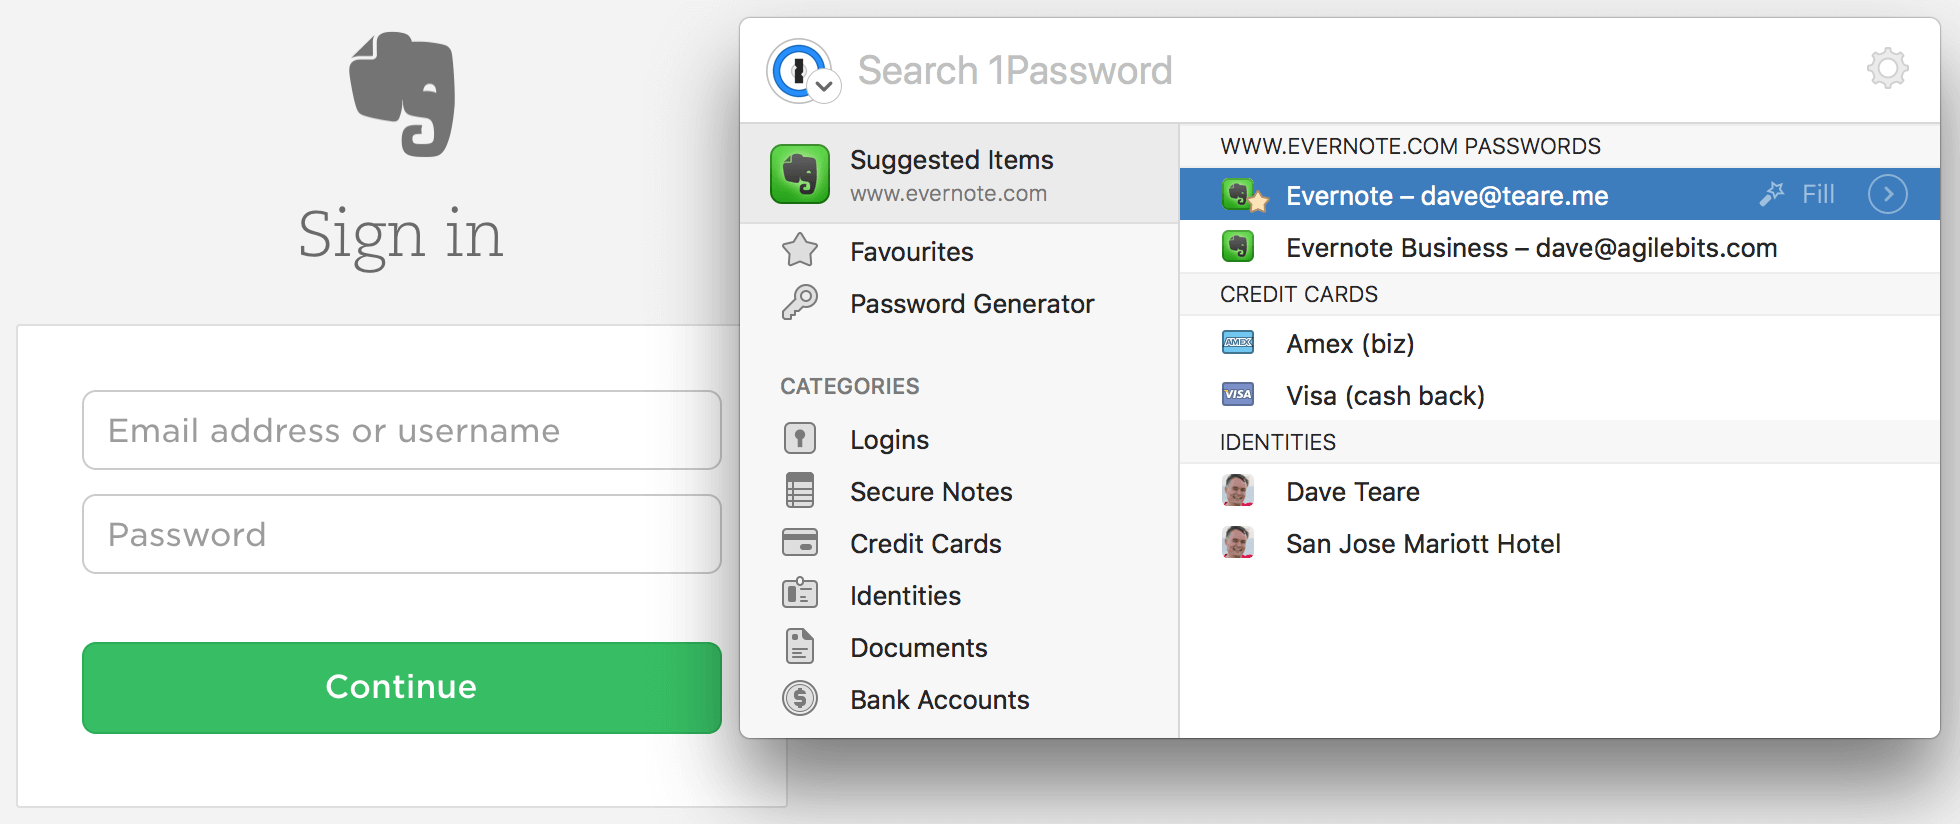 1Password mini showing suggested items for Evernote.com